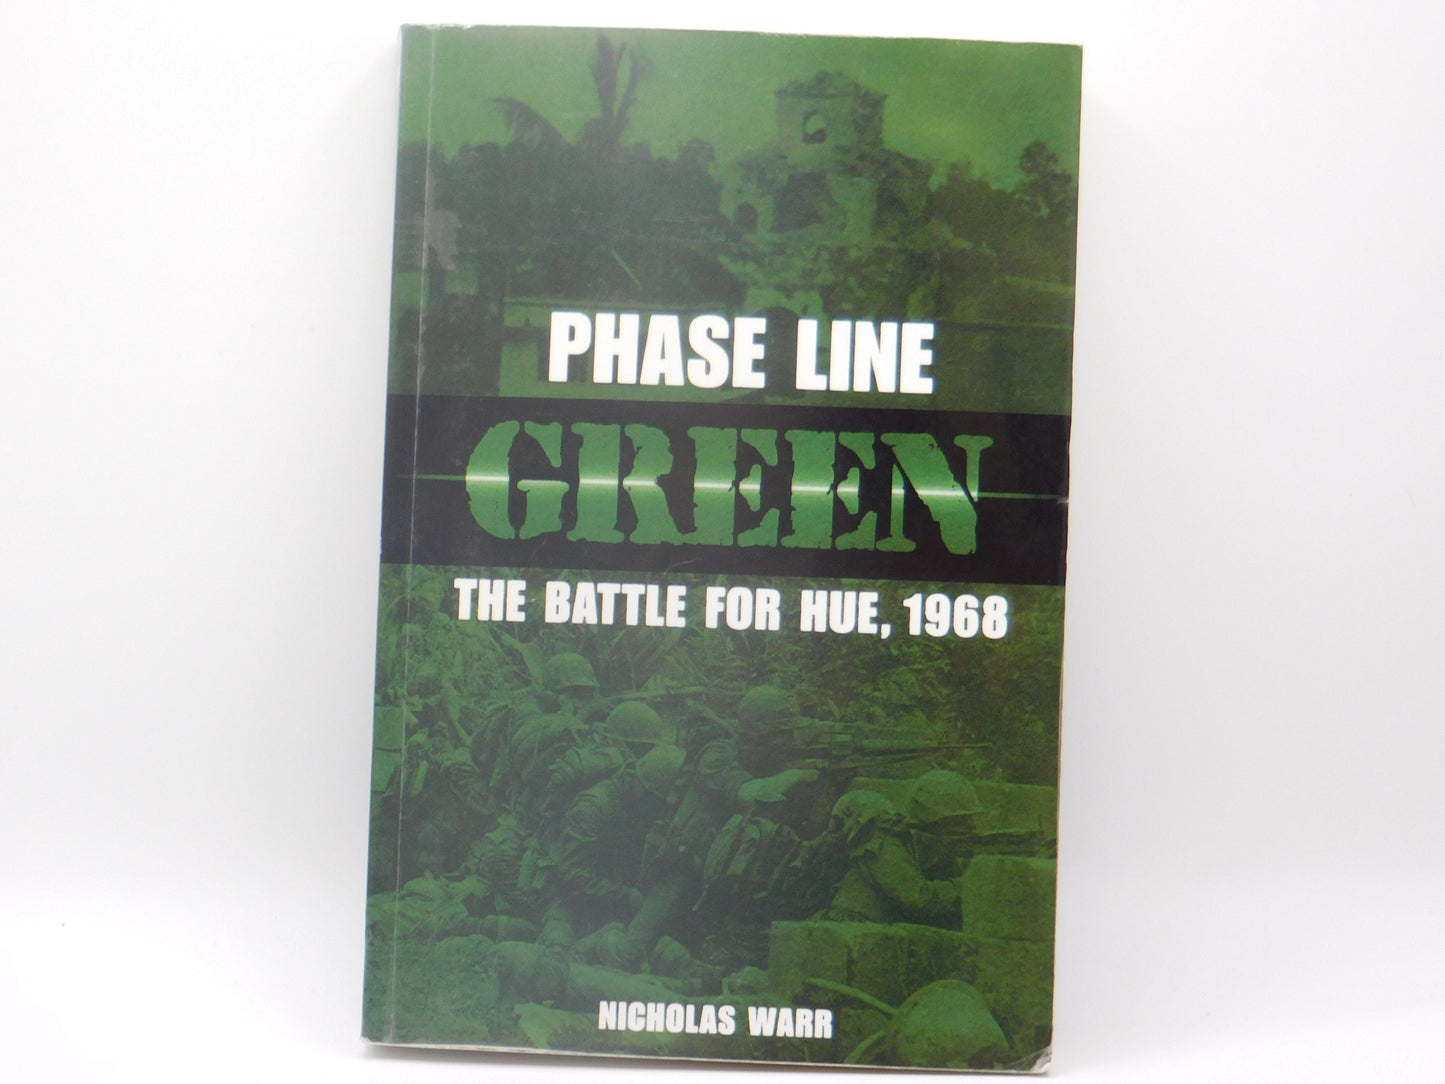 Phase Line Green by Nicholas Warr